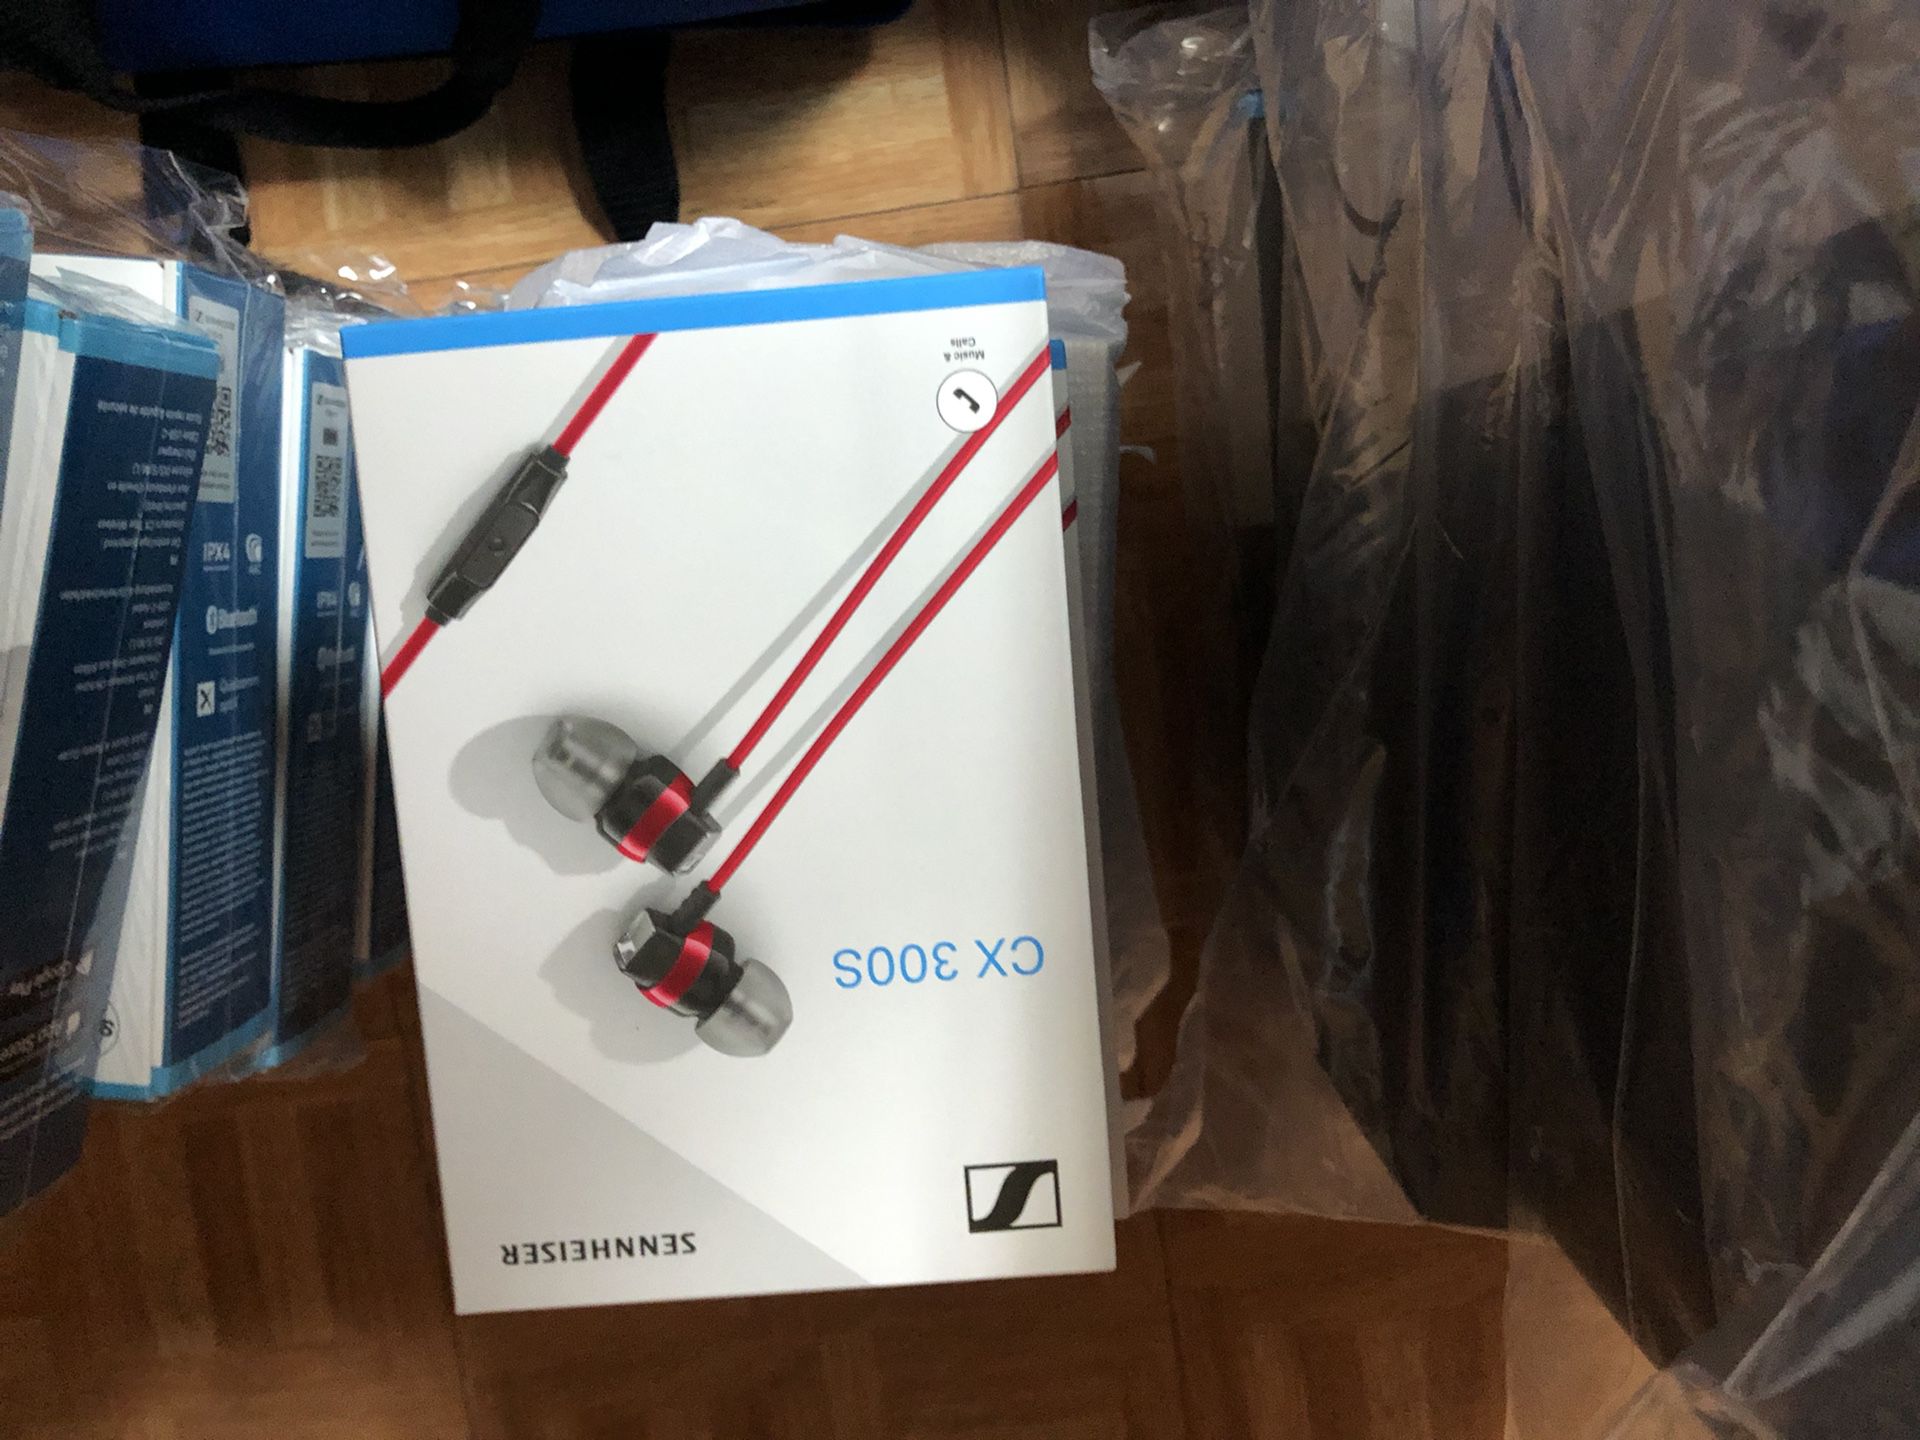 Boost your sound with Sennheiser's CX 300S earphones which offer amazingly detailed sound reproduction and enhanced bass response thanks to Sennheiser